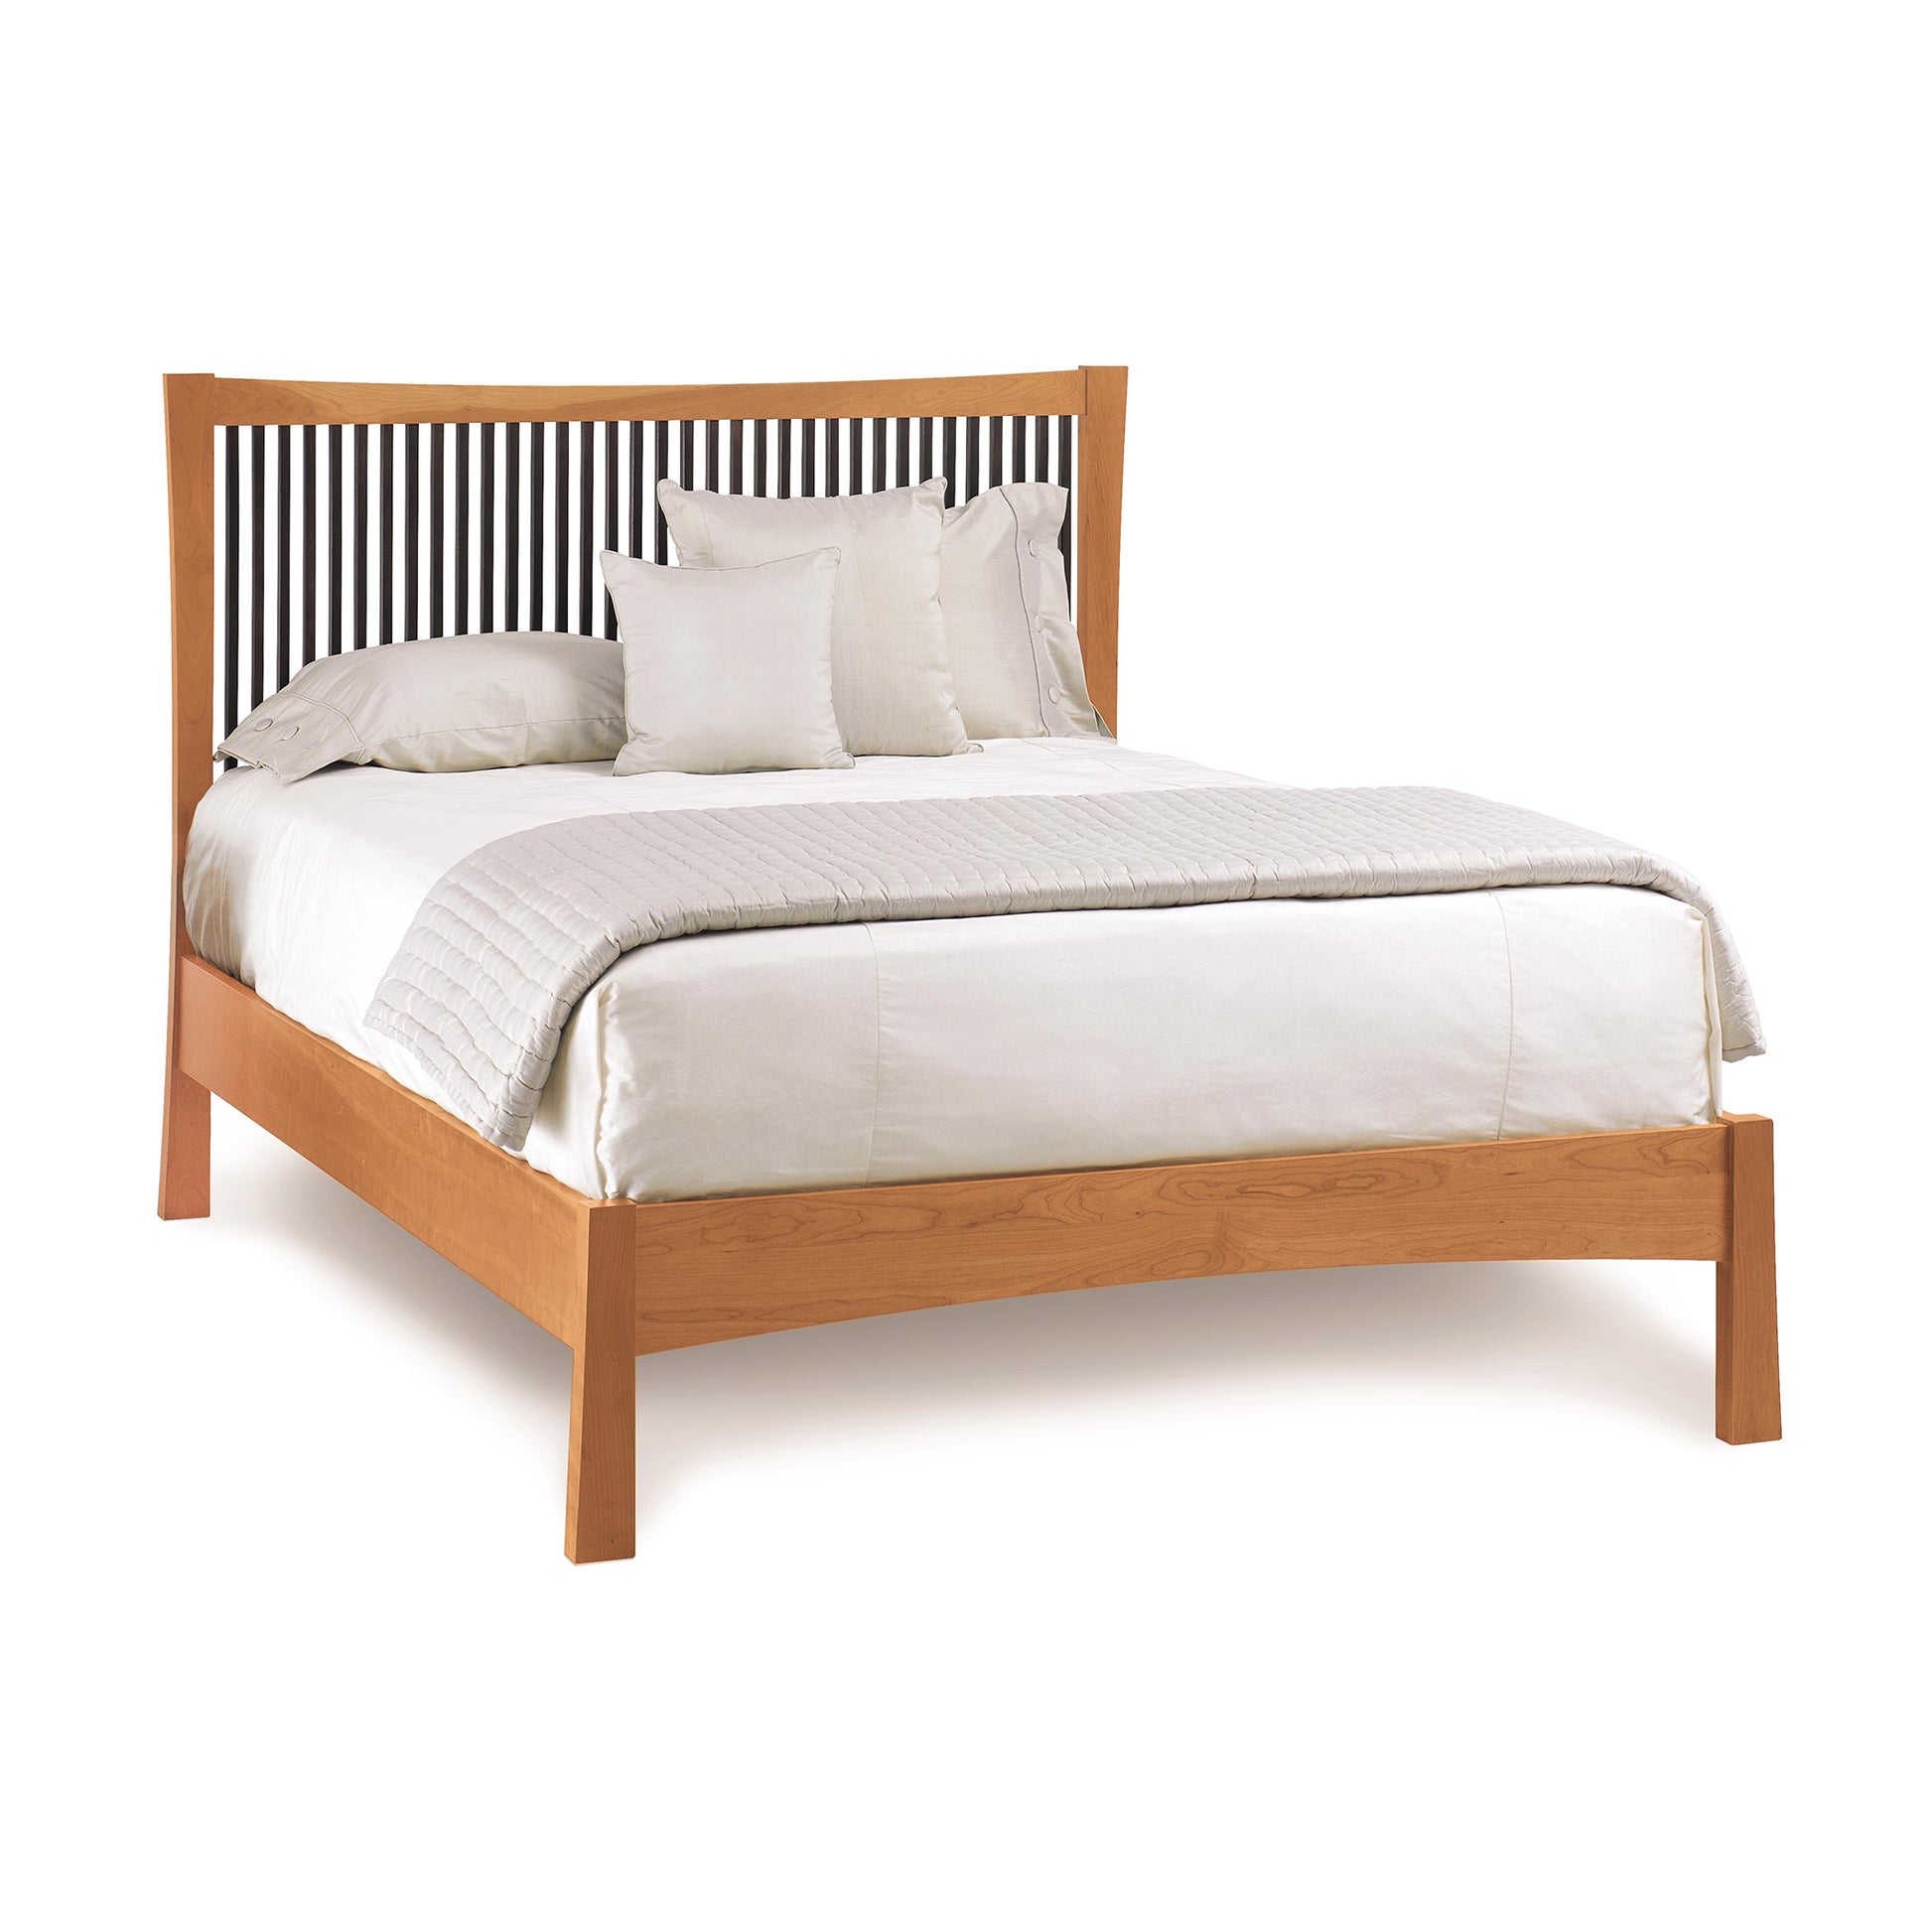 The Copeland Furniture Berkeley Cherry Platform Bed features a wooden headboard and footboard, designed in the American Craftsman style.